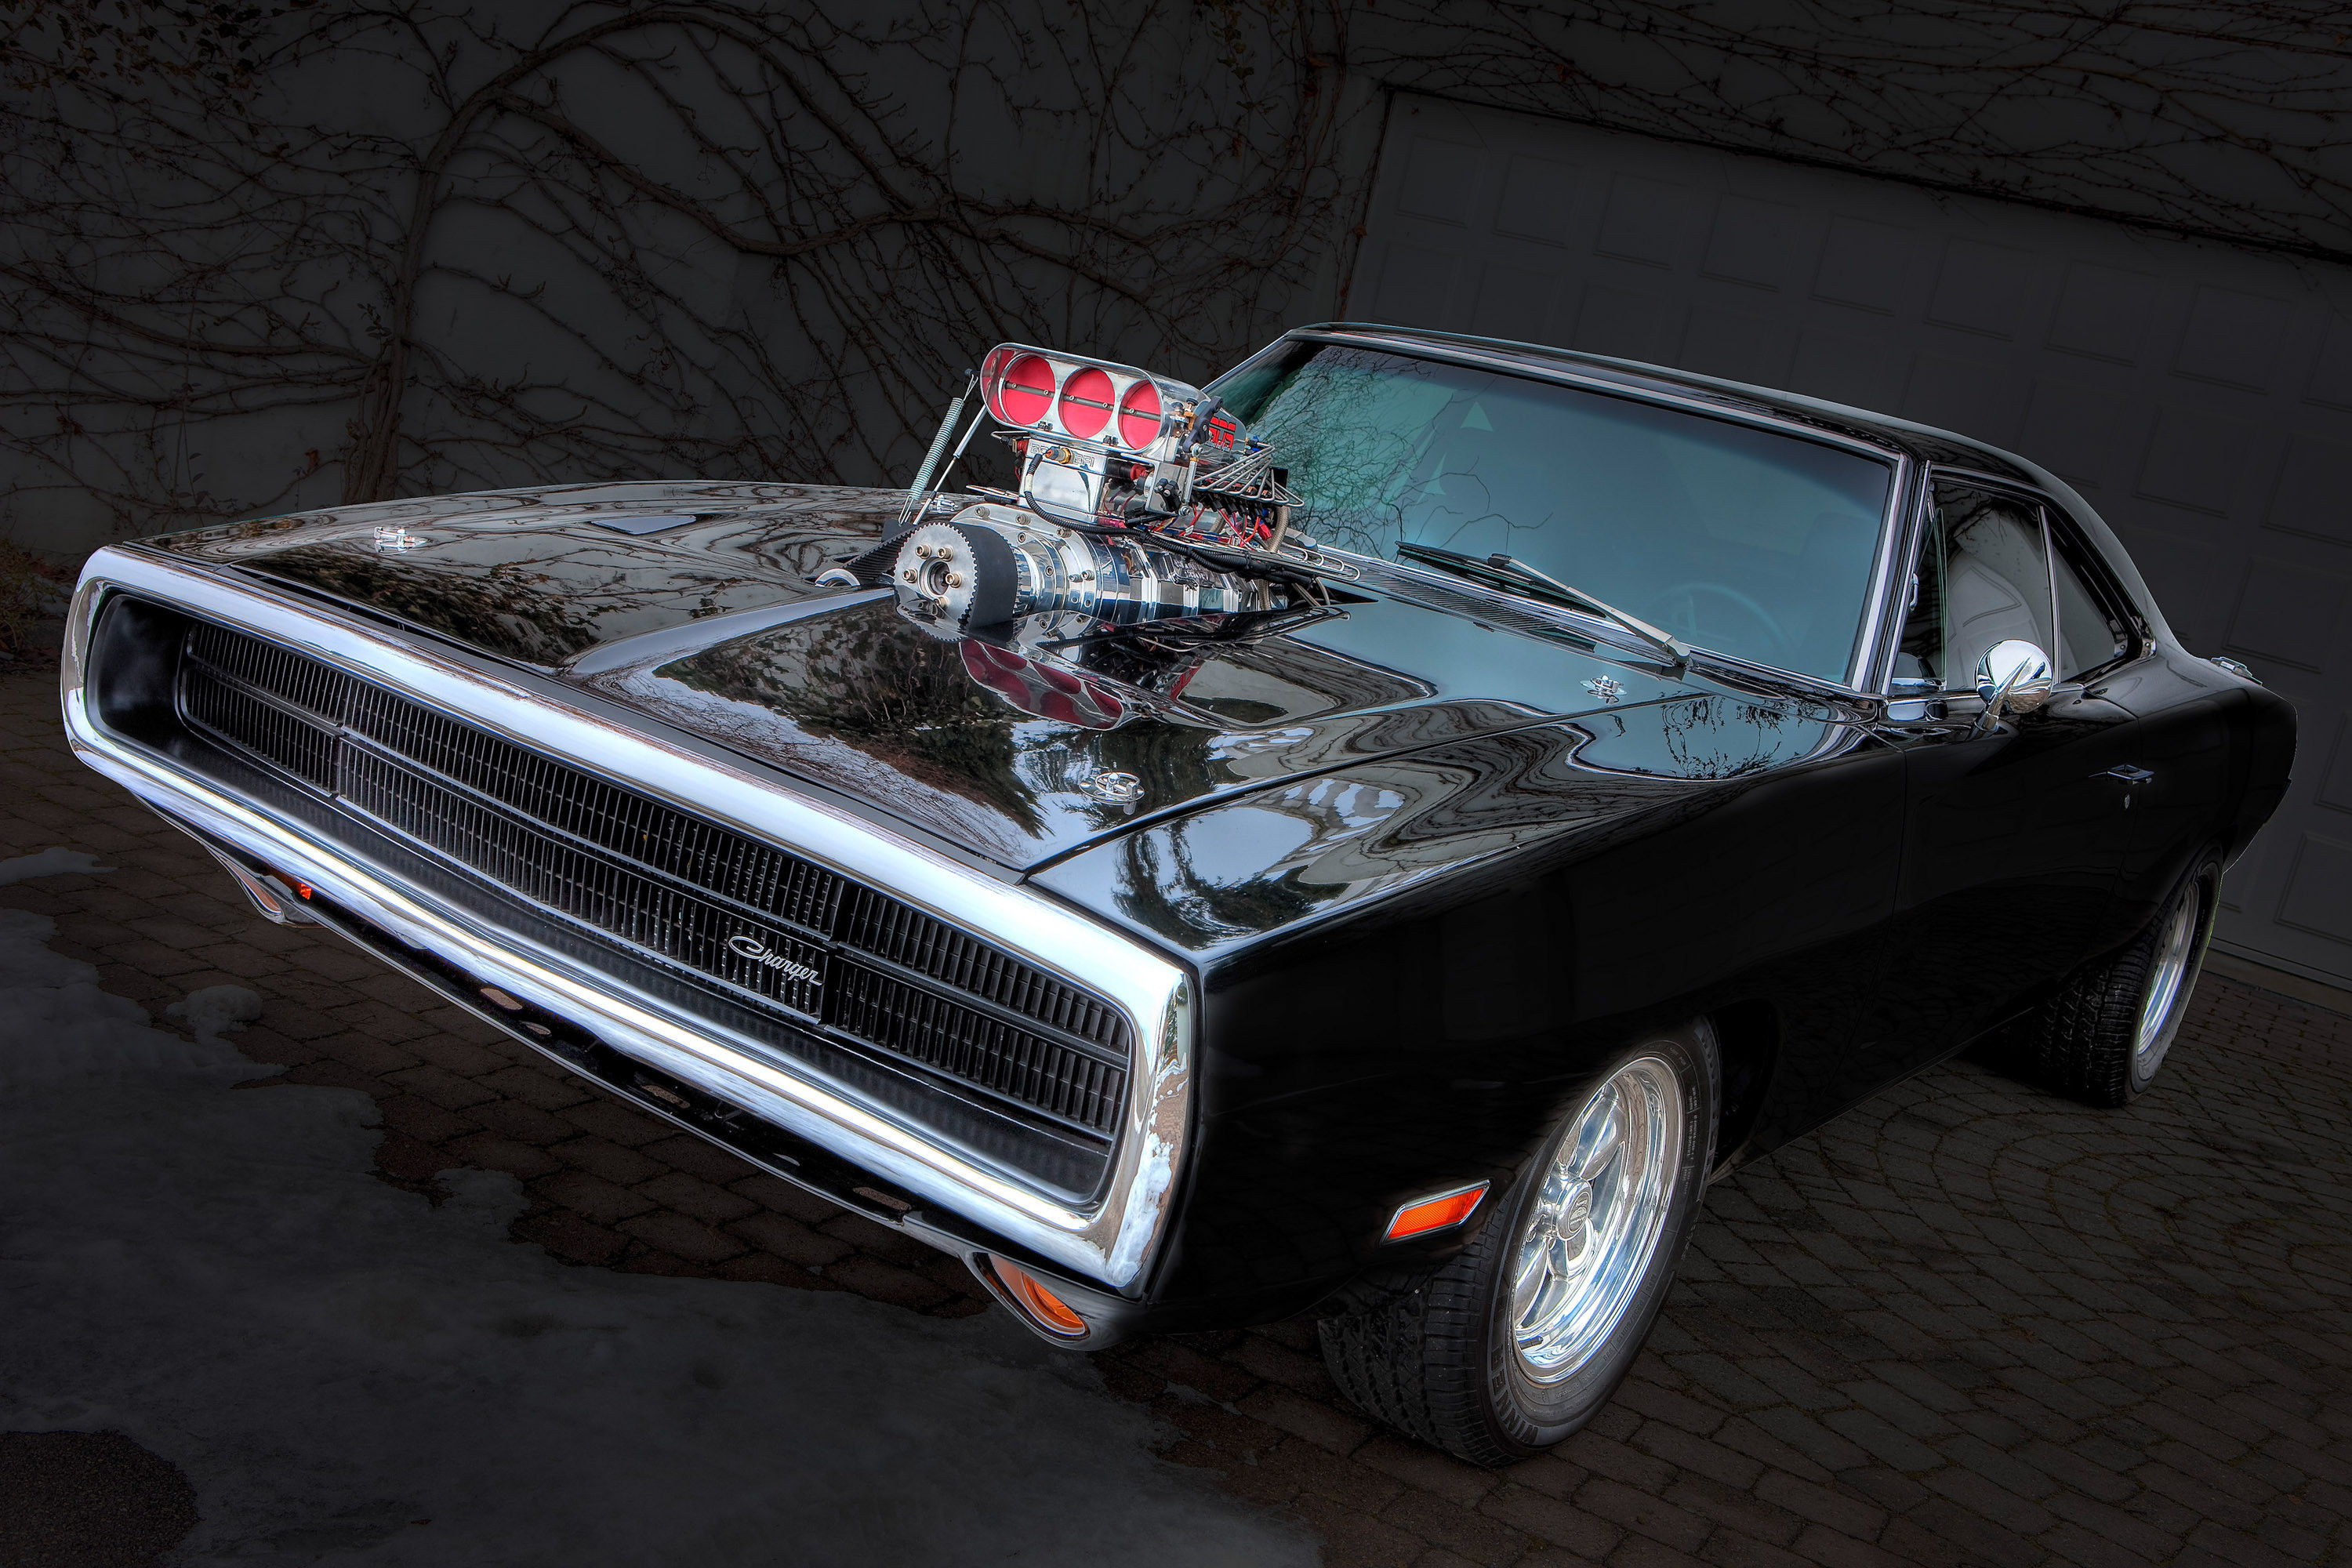 1970 Dodge Charger Rt Wallpaper 71 Images